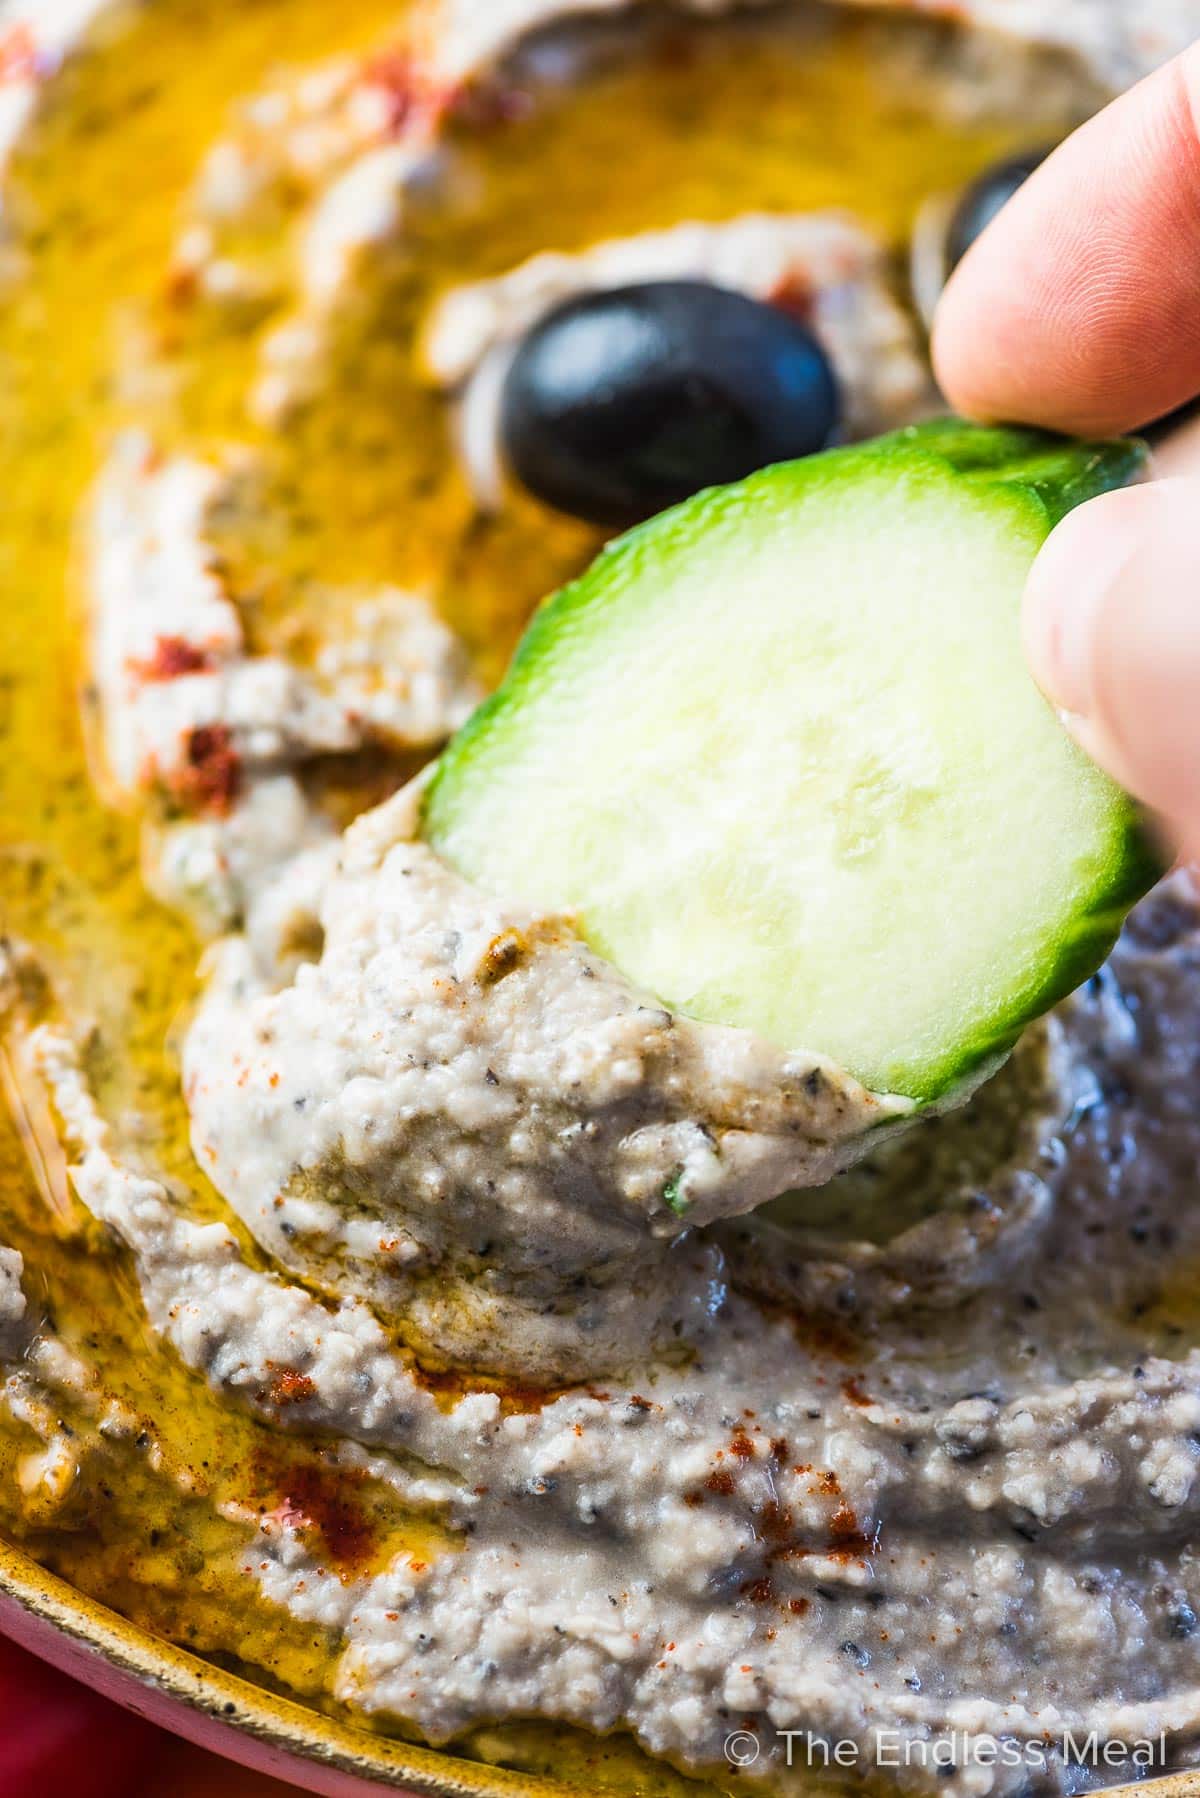 A cucumber slice scooping up some white bean dip with olives.